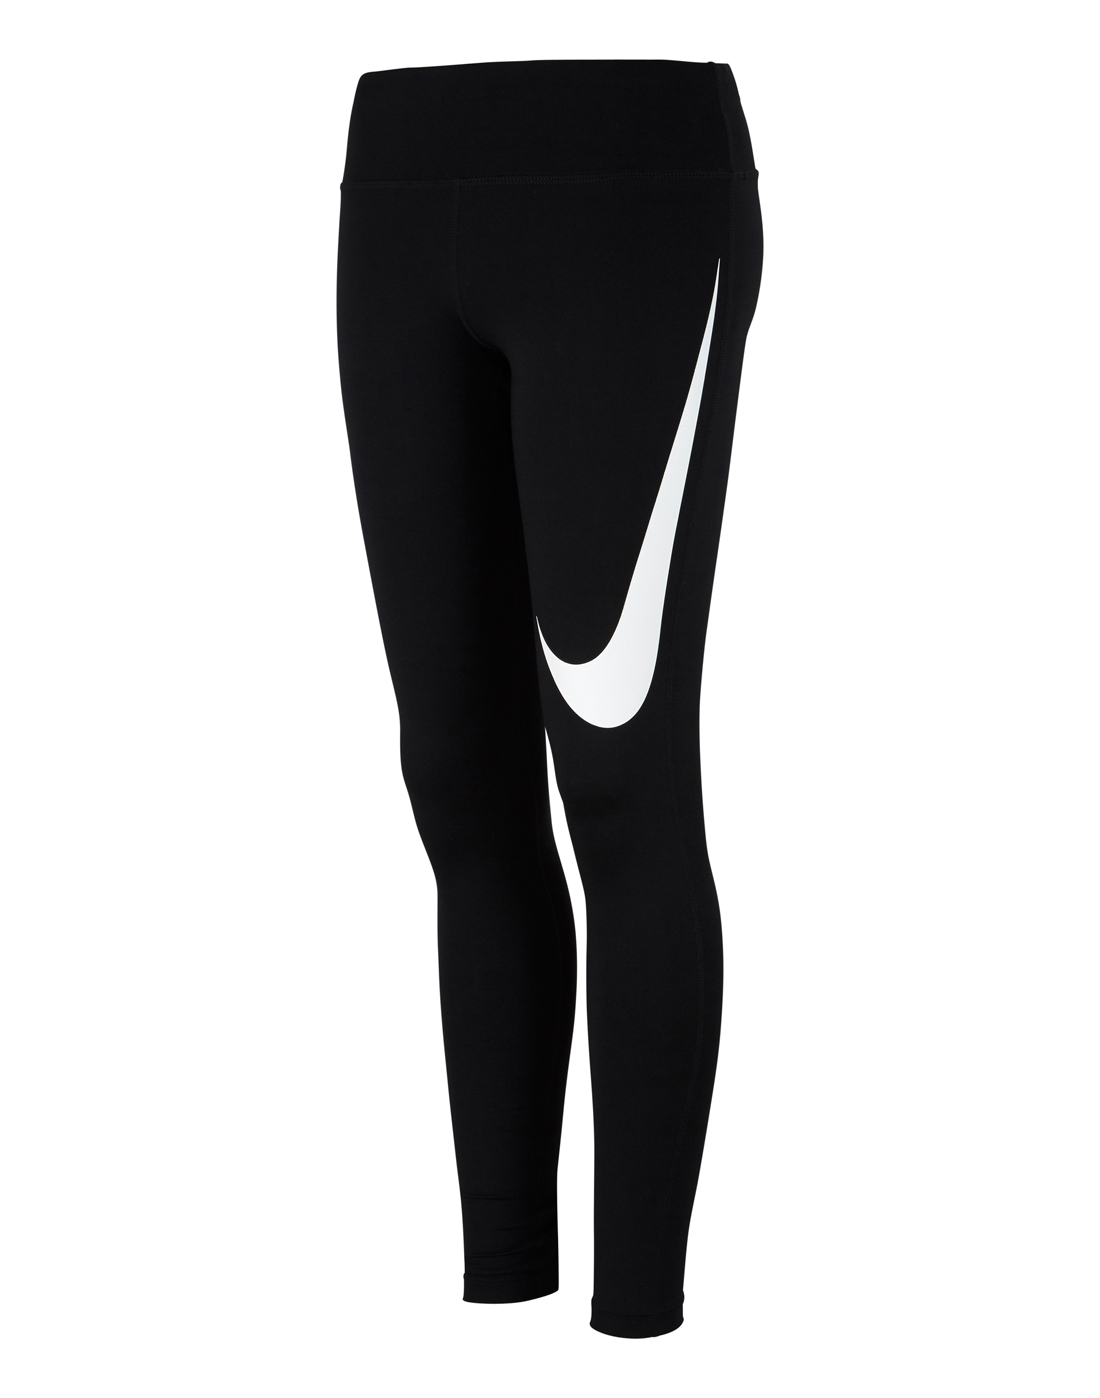 Nike Womens Essential Tight - Black | Life Style Sports UK